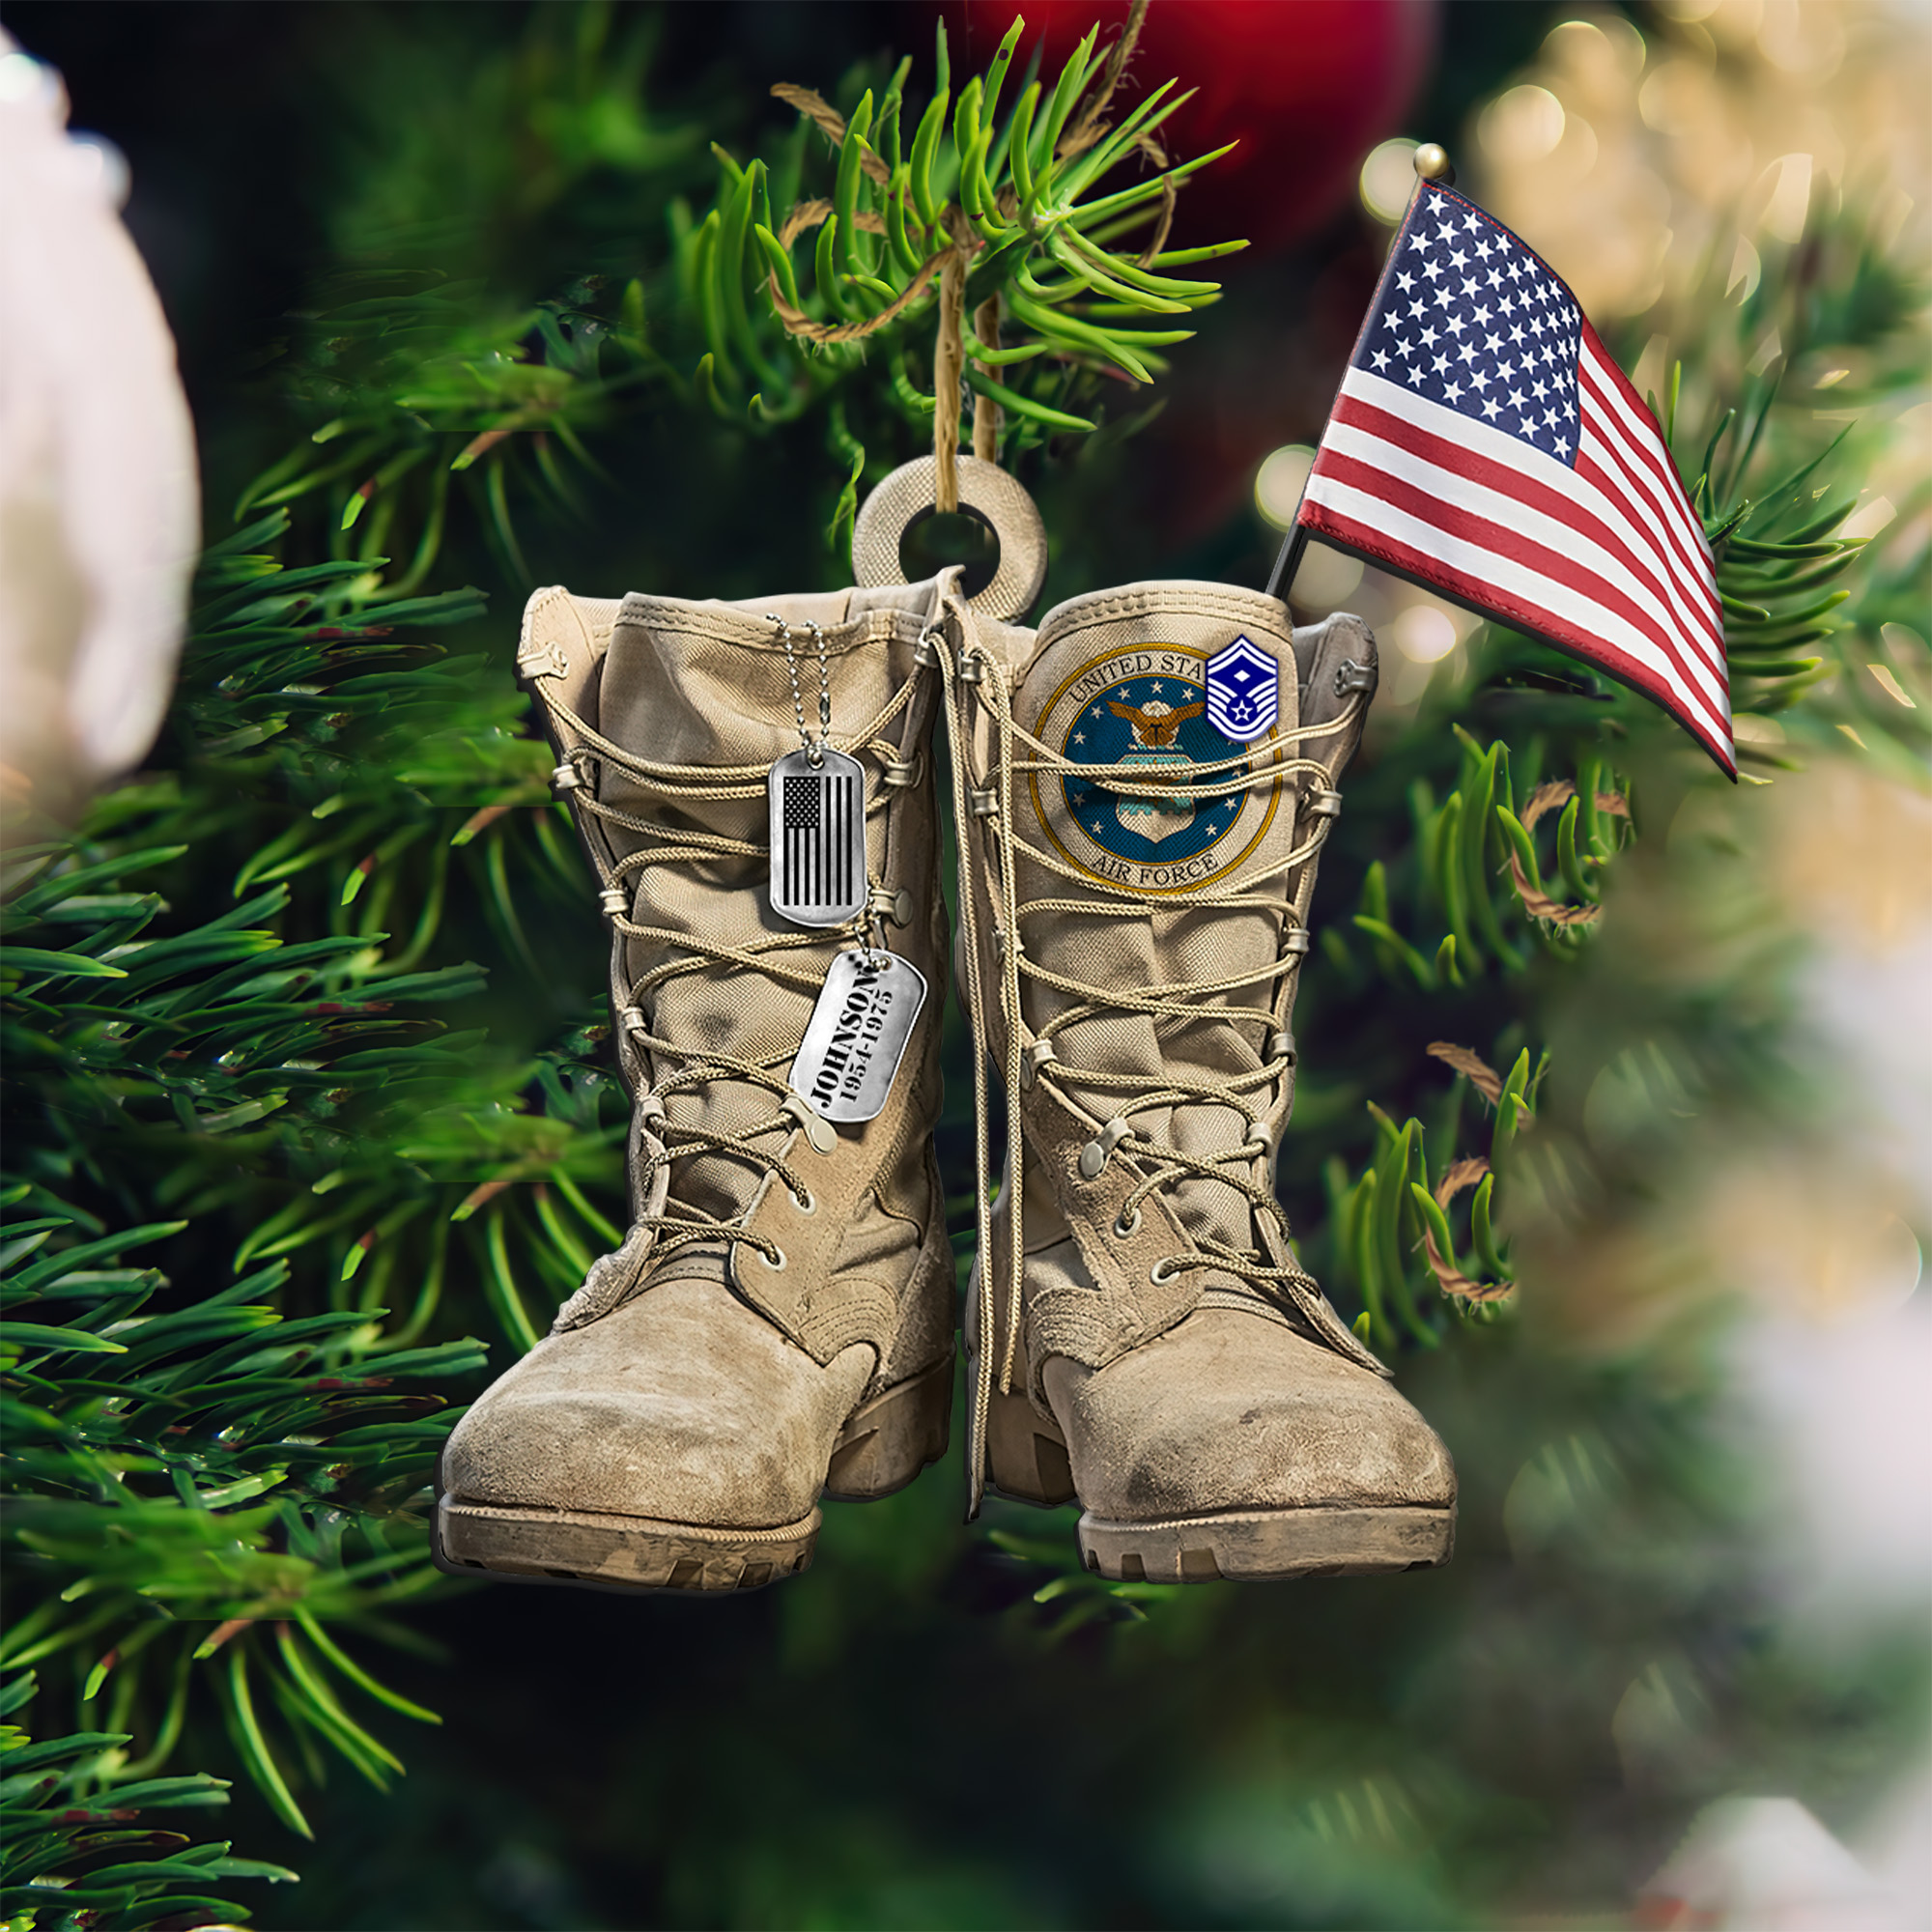 US_AIR_FORCE_Military_Boots_Personalized_Custom_Christmas_Ornament_1